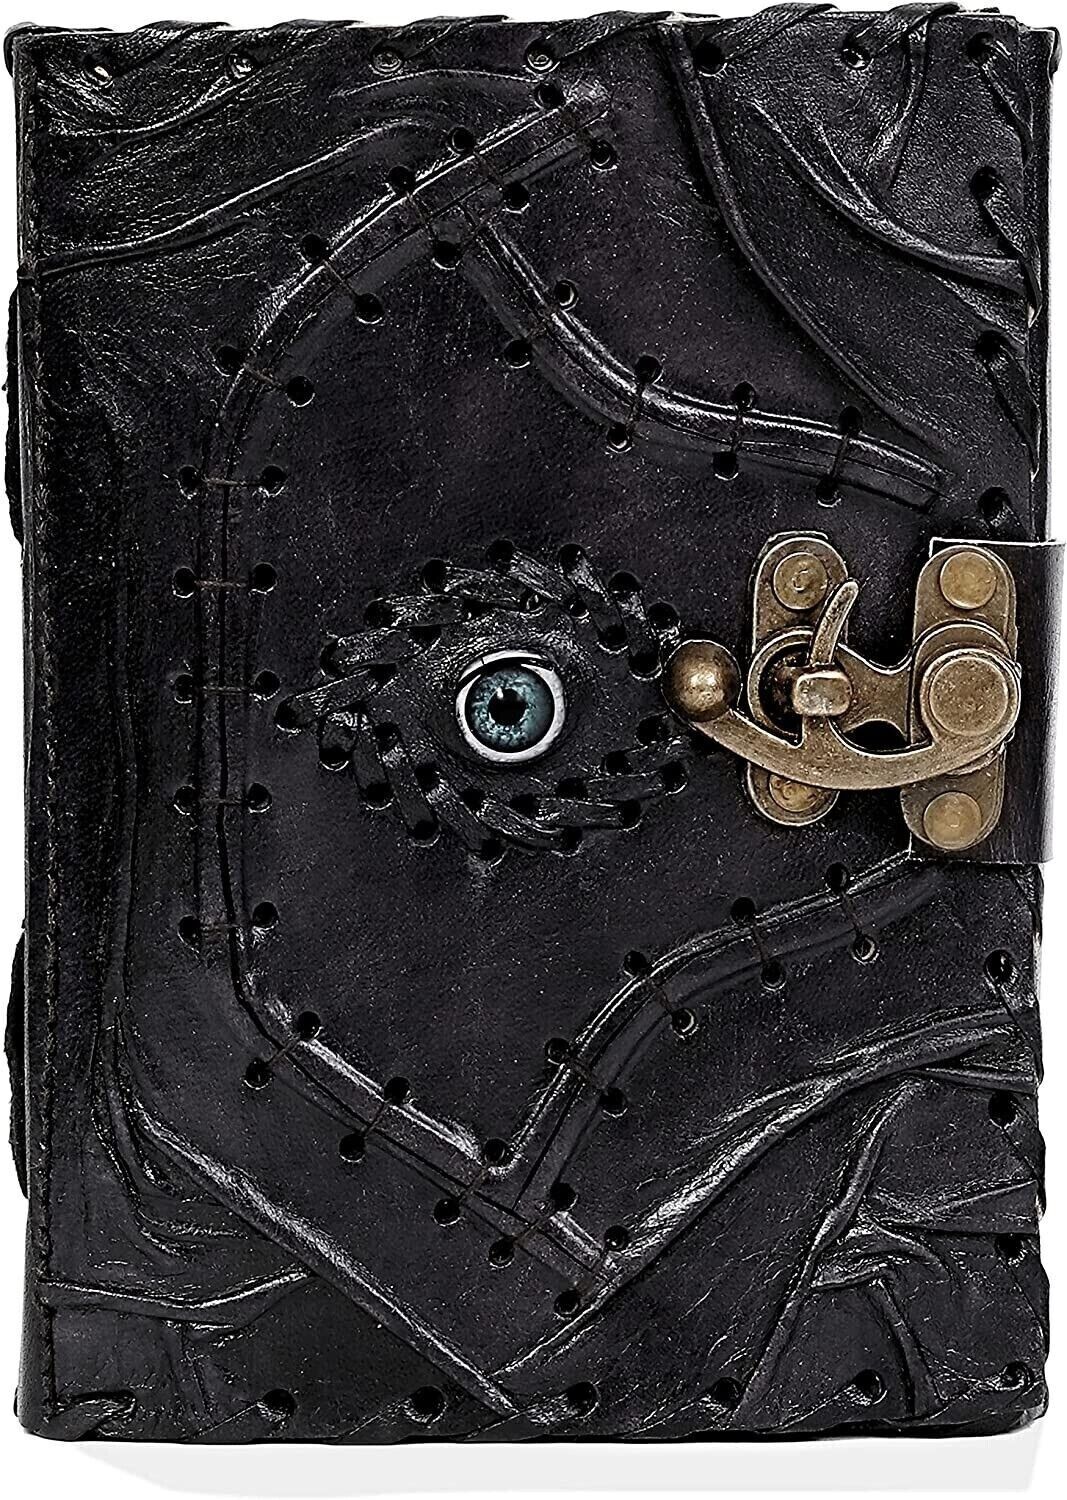 Hocus Pocus Book of Spells Evil Eye Leather Diary Notebook Leather Journal